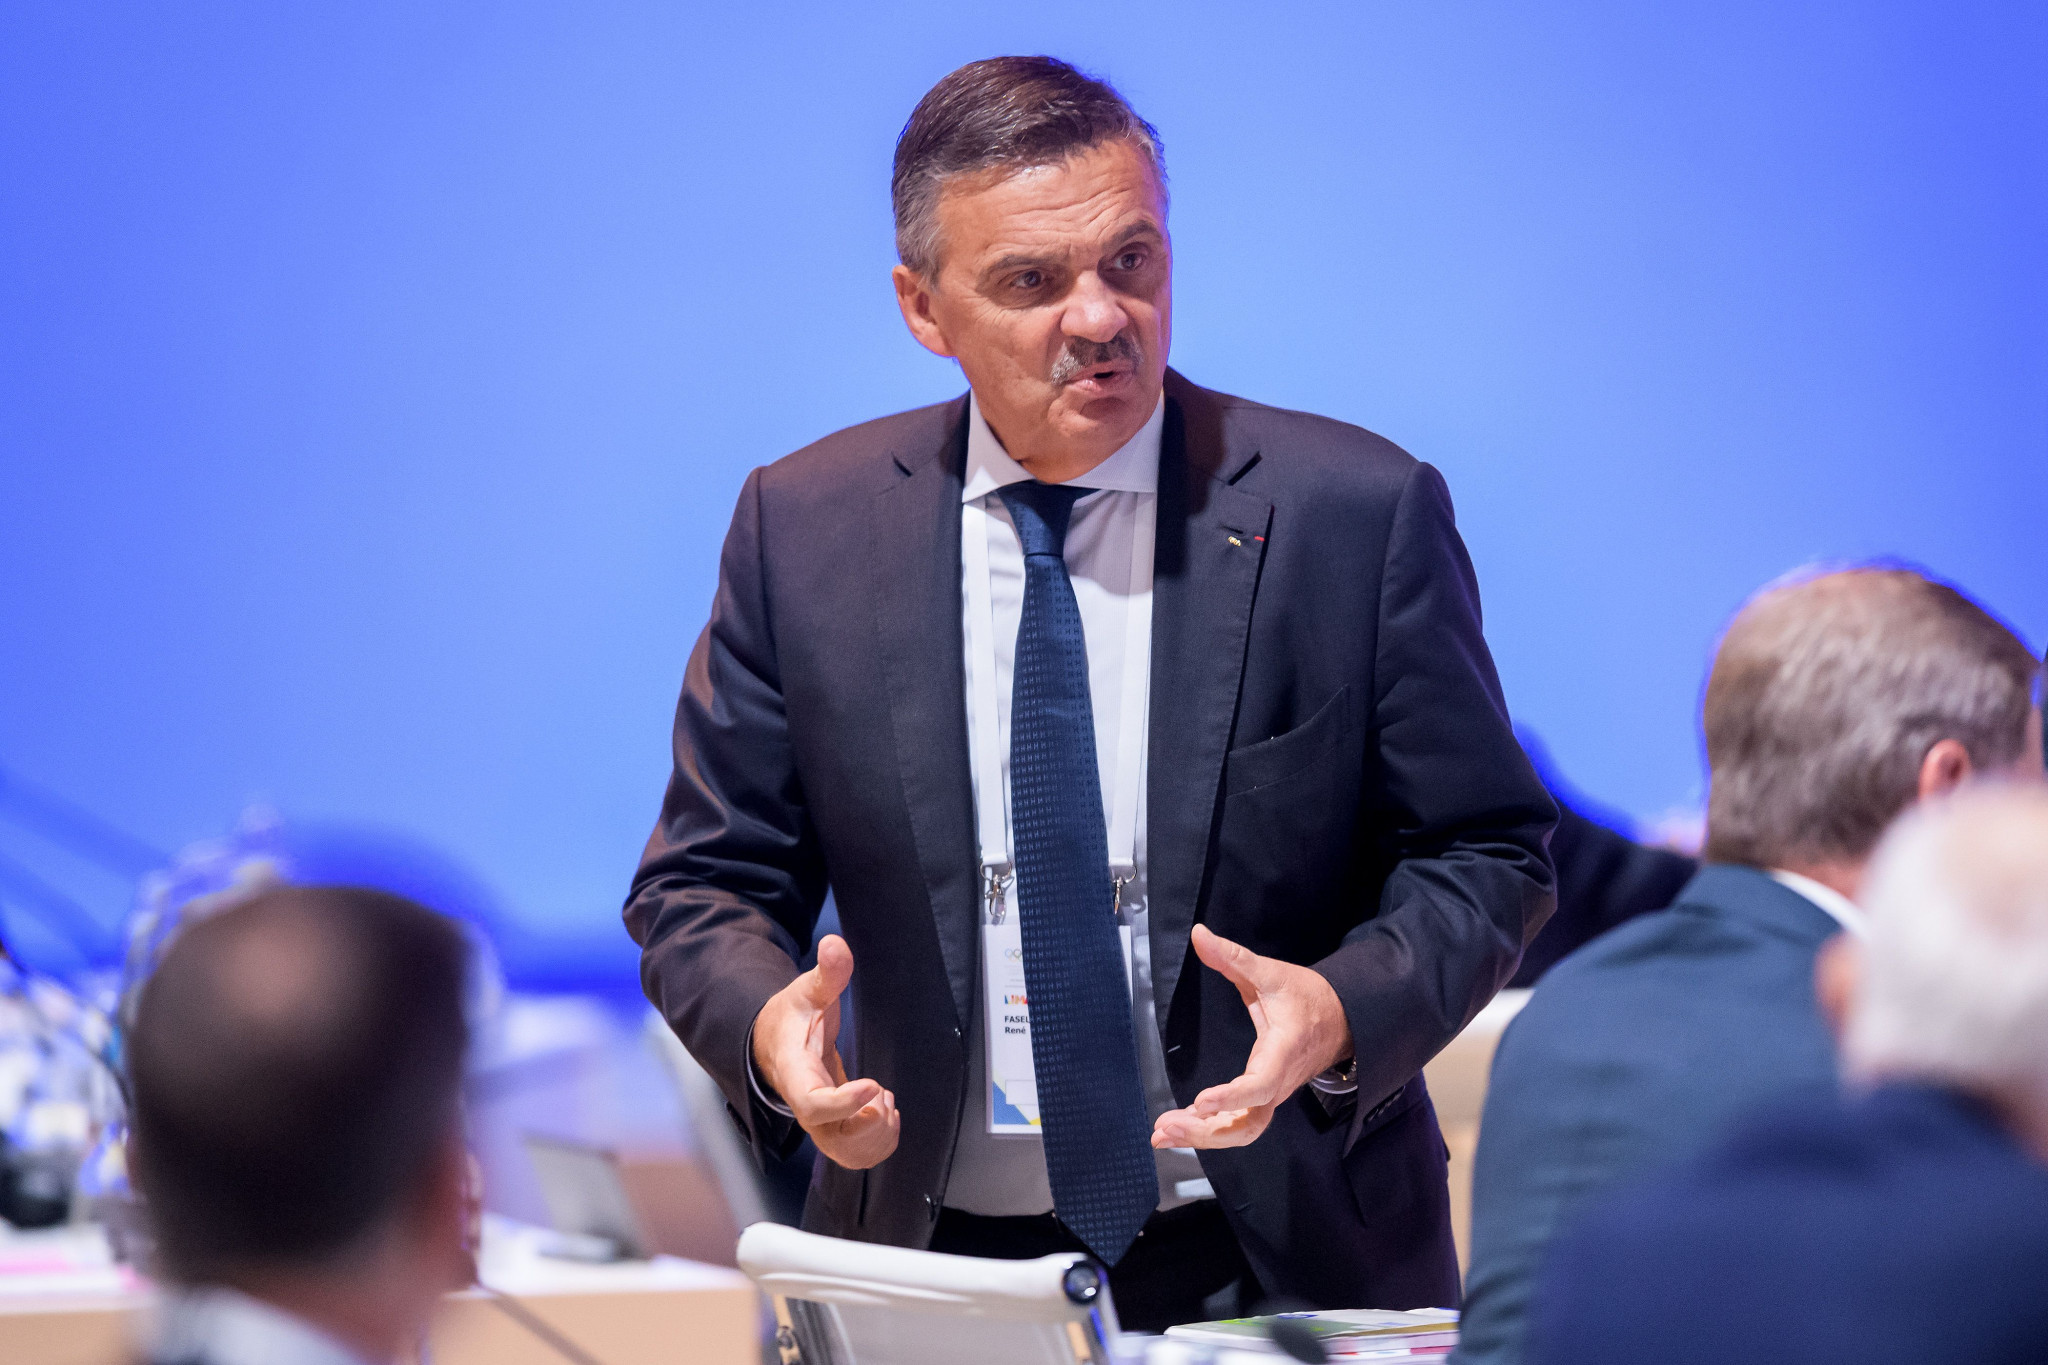 IIHF President Rene Fasel was among the speakers at the summit ©Getty Images